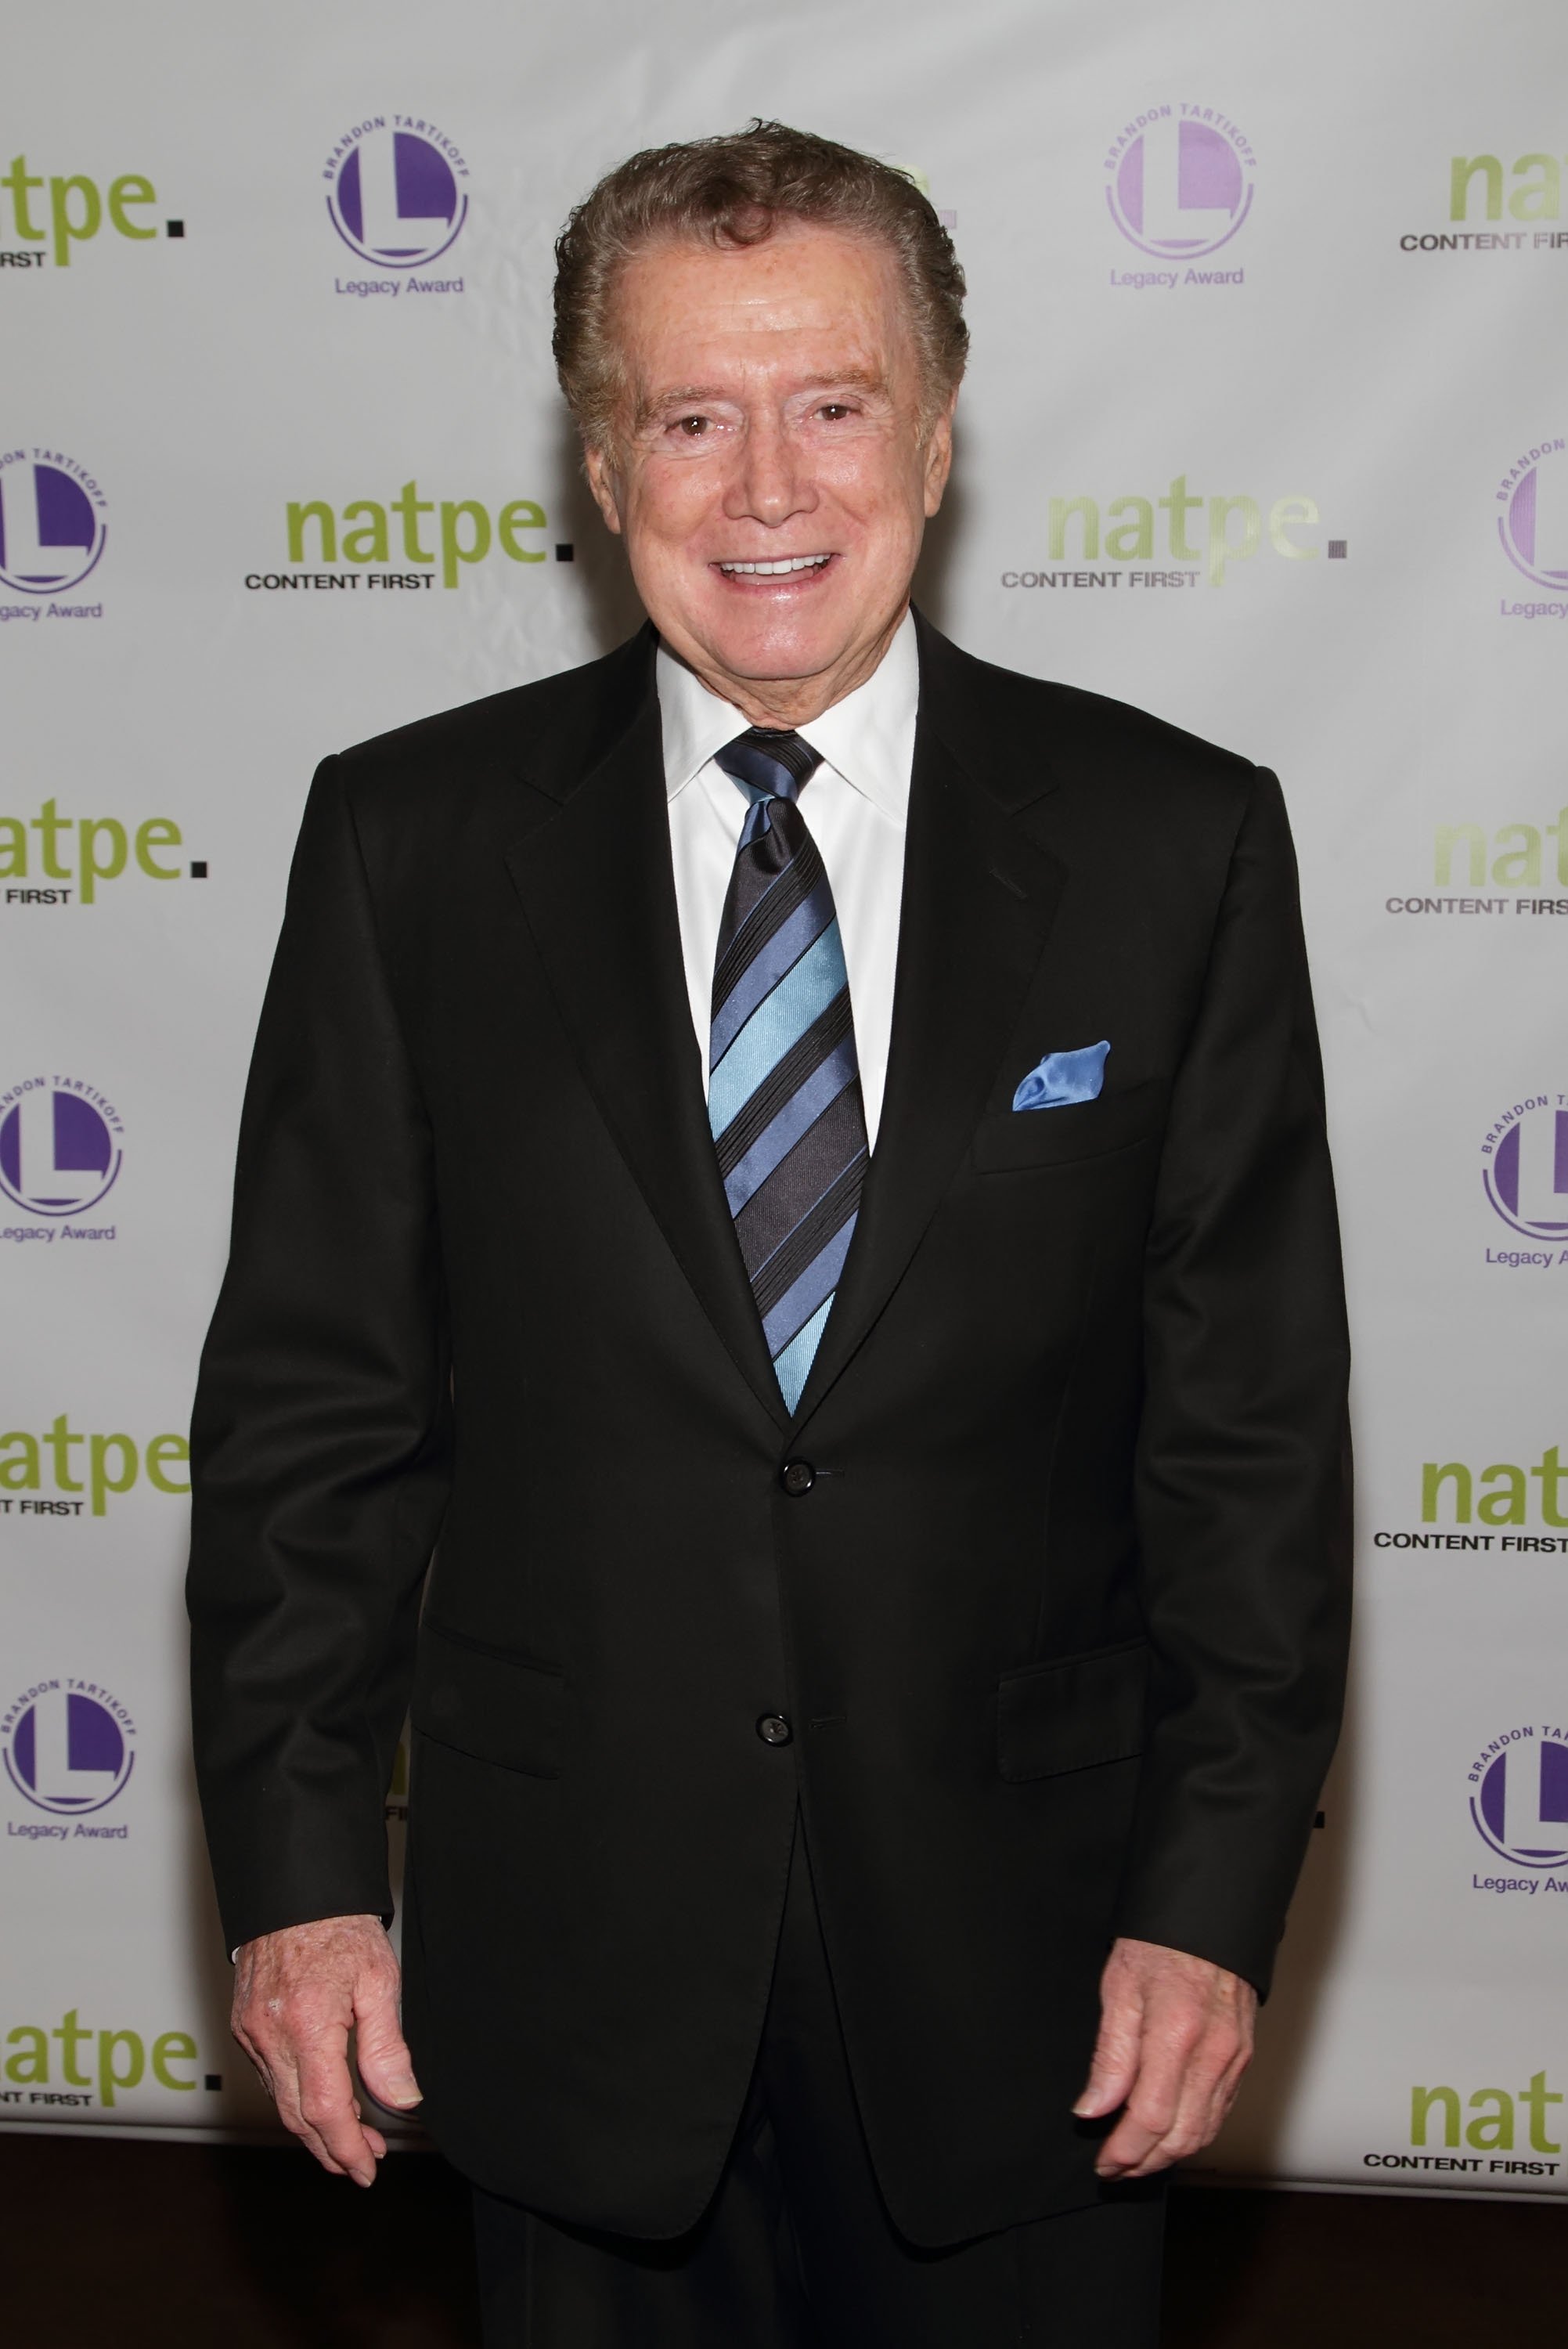 Regis Philbin on January 25, 2011 in Miami Beach, Florida | Source: Getty Images